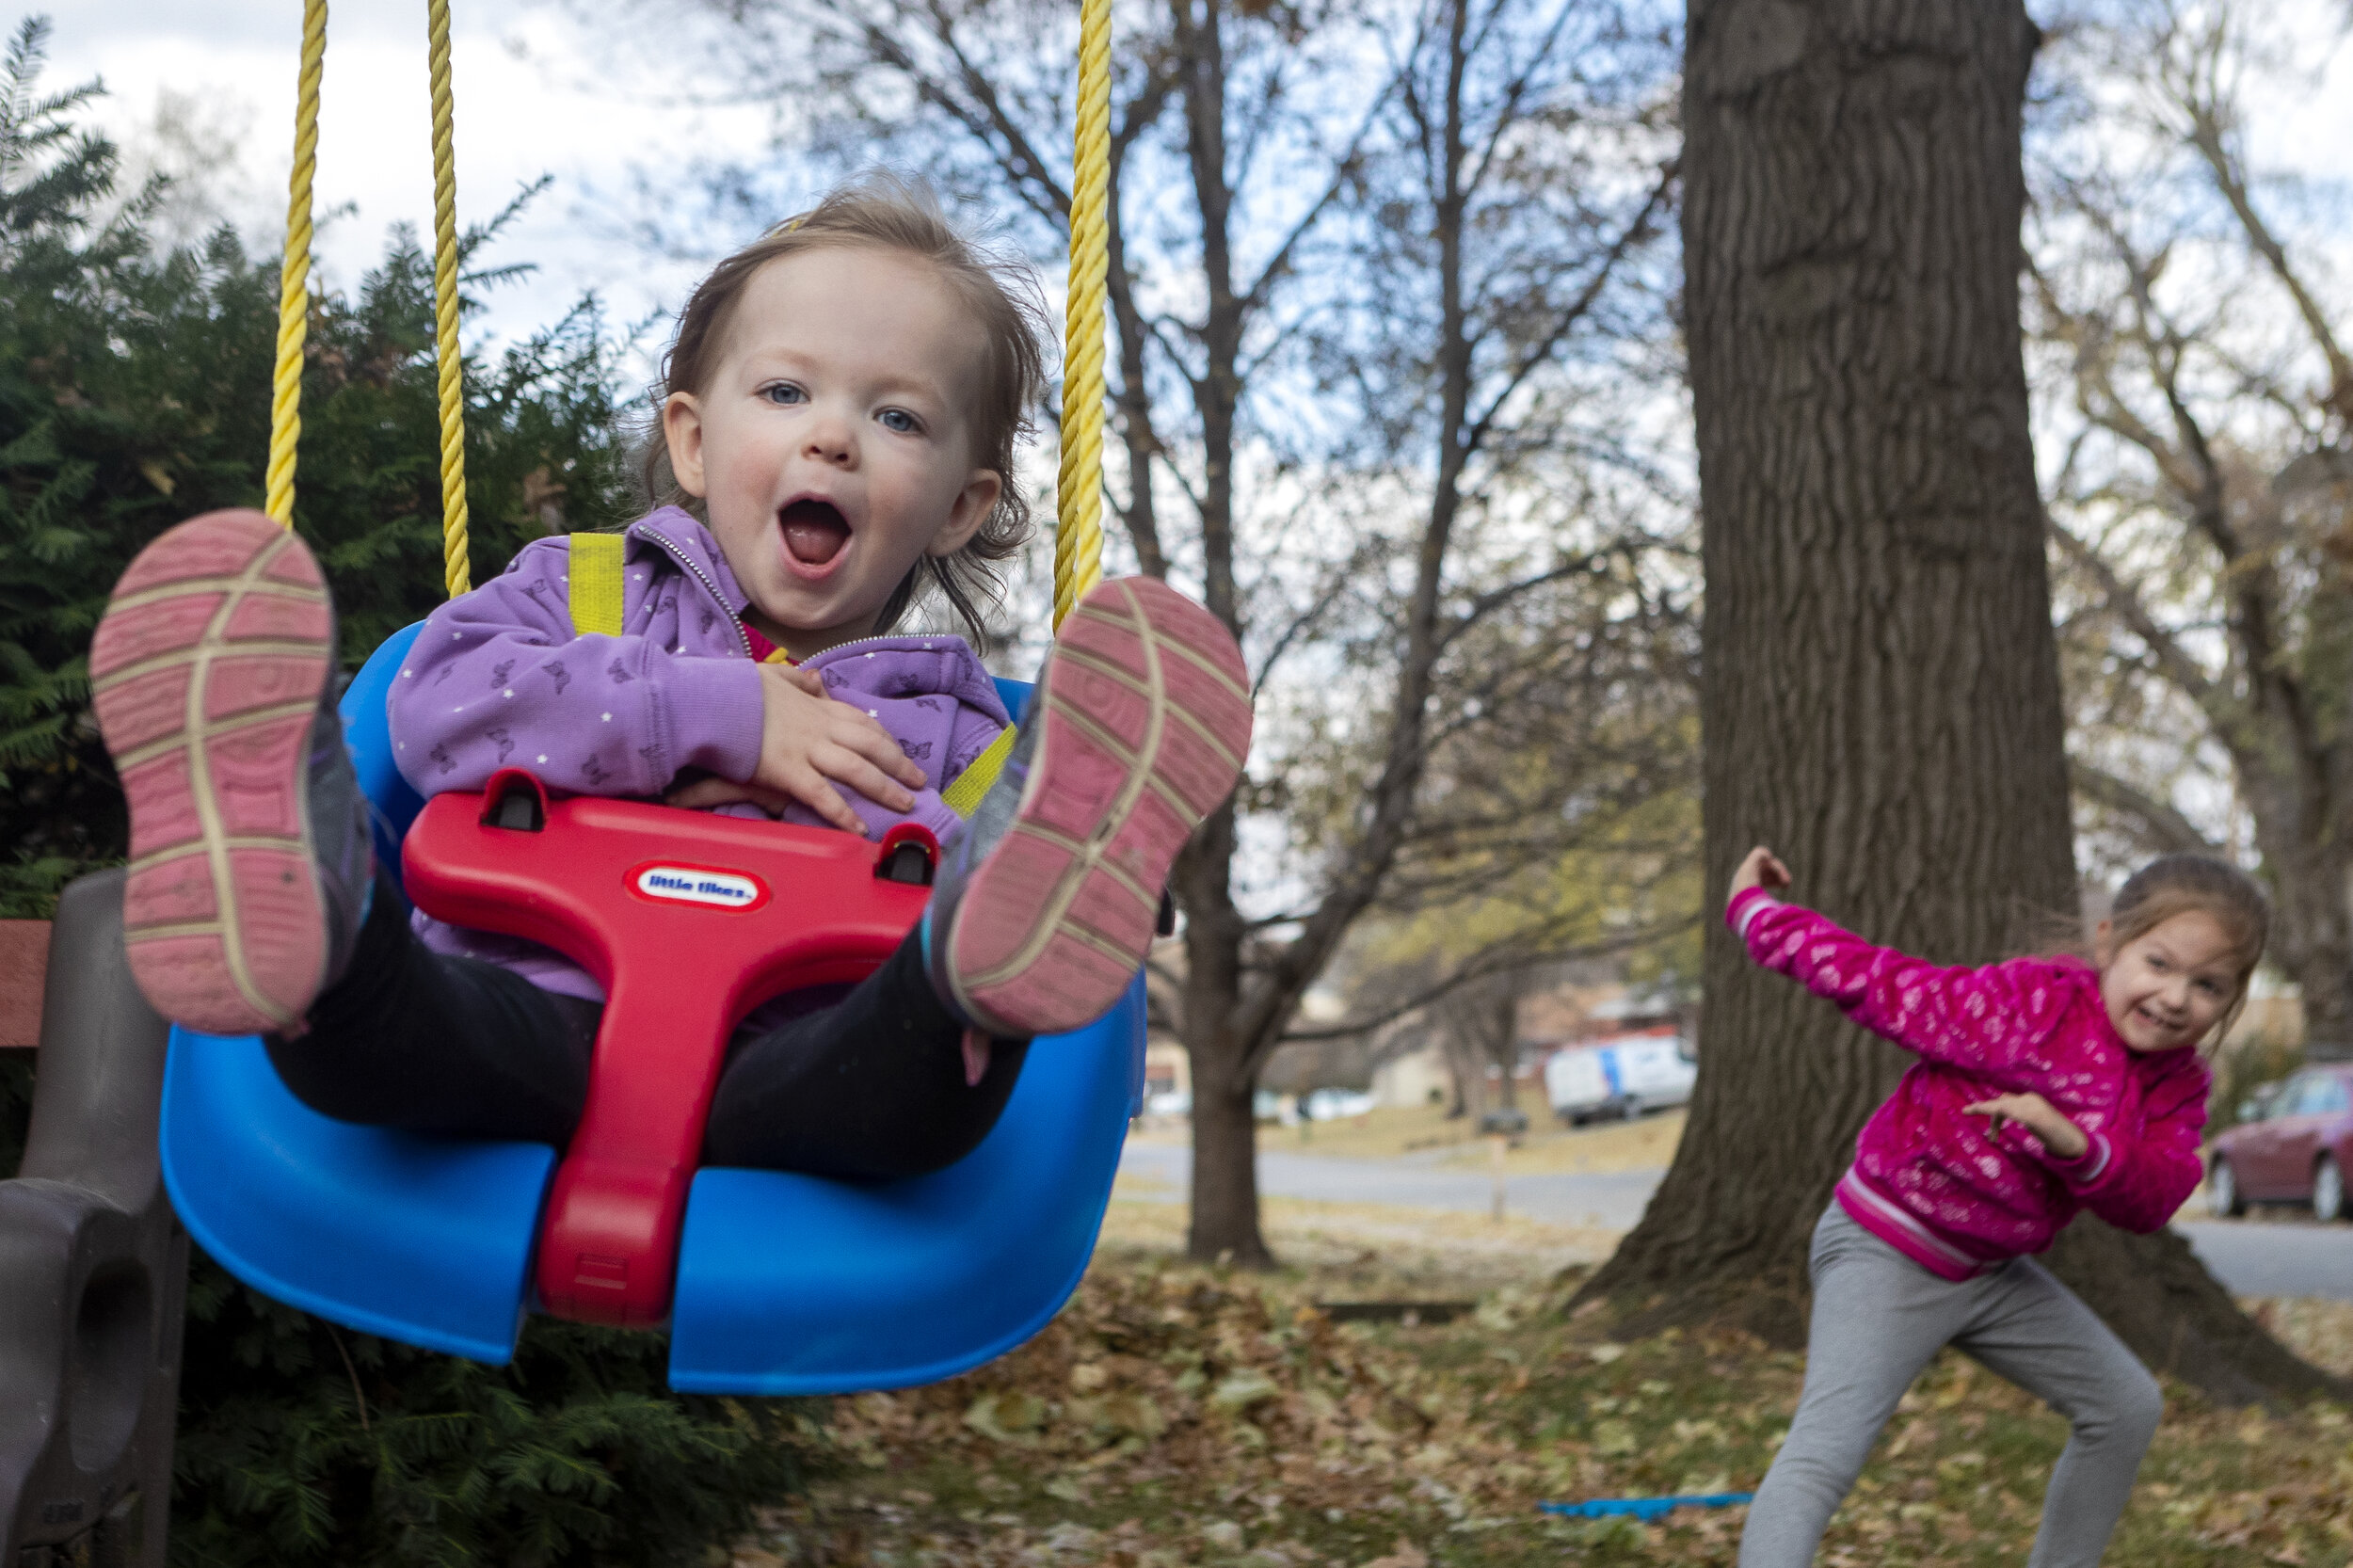  Lea Ehly (left) swings high after getting a push from her sister Alexis Ehly while they take a break from raking leaves with their family outside their Lincoln home on Sunday, November 08, 2020, in Lincoln , Nebraska. KENNETH FERRIERA, Journal Star.